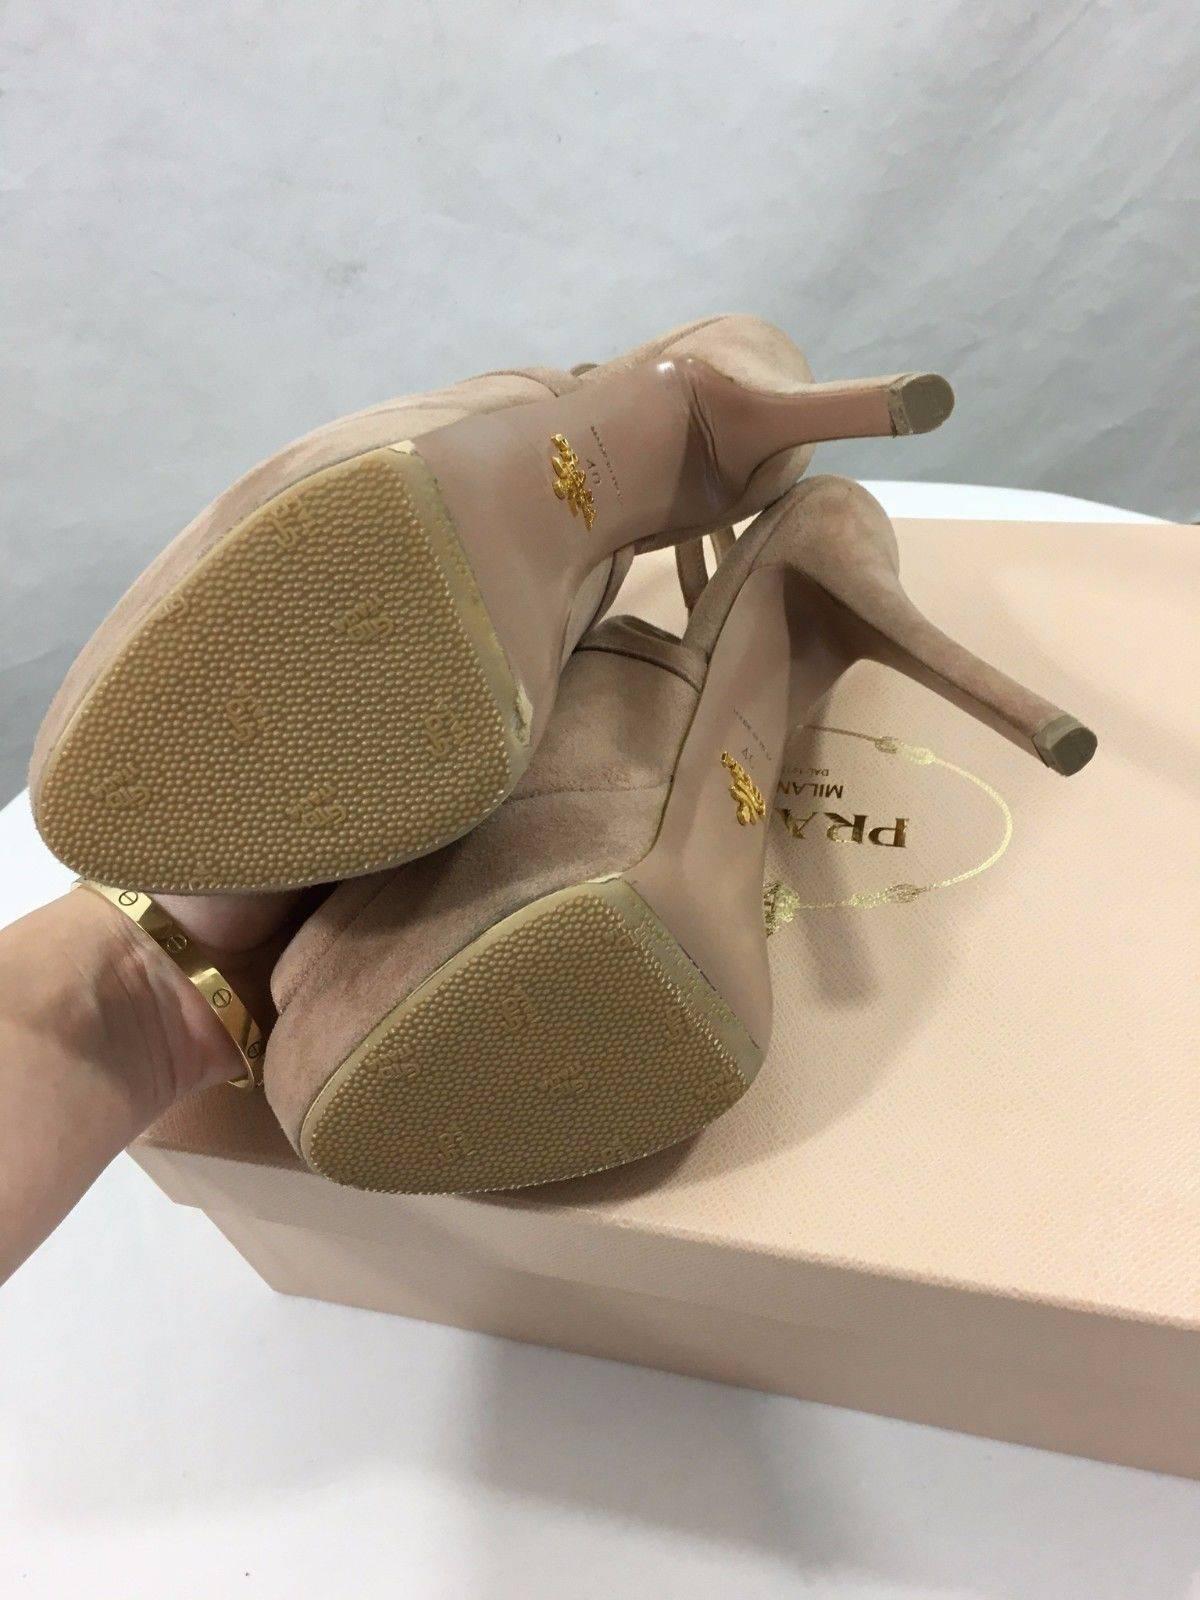 Item - Prada Platform Stiletto High Heel in Suede Beige

Condition - NEW!  New Worn.

Original Retail Price - $895 + tax

SKU - 807

Size - Euro 40 or US 9 to 9.5

Material - Suede

Heel - 5

Comes with - Original Box and Extra Heel Taps

Additional